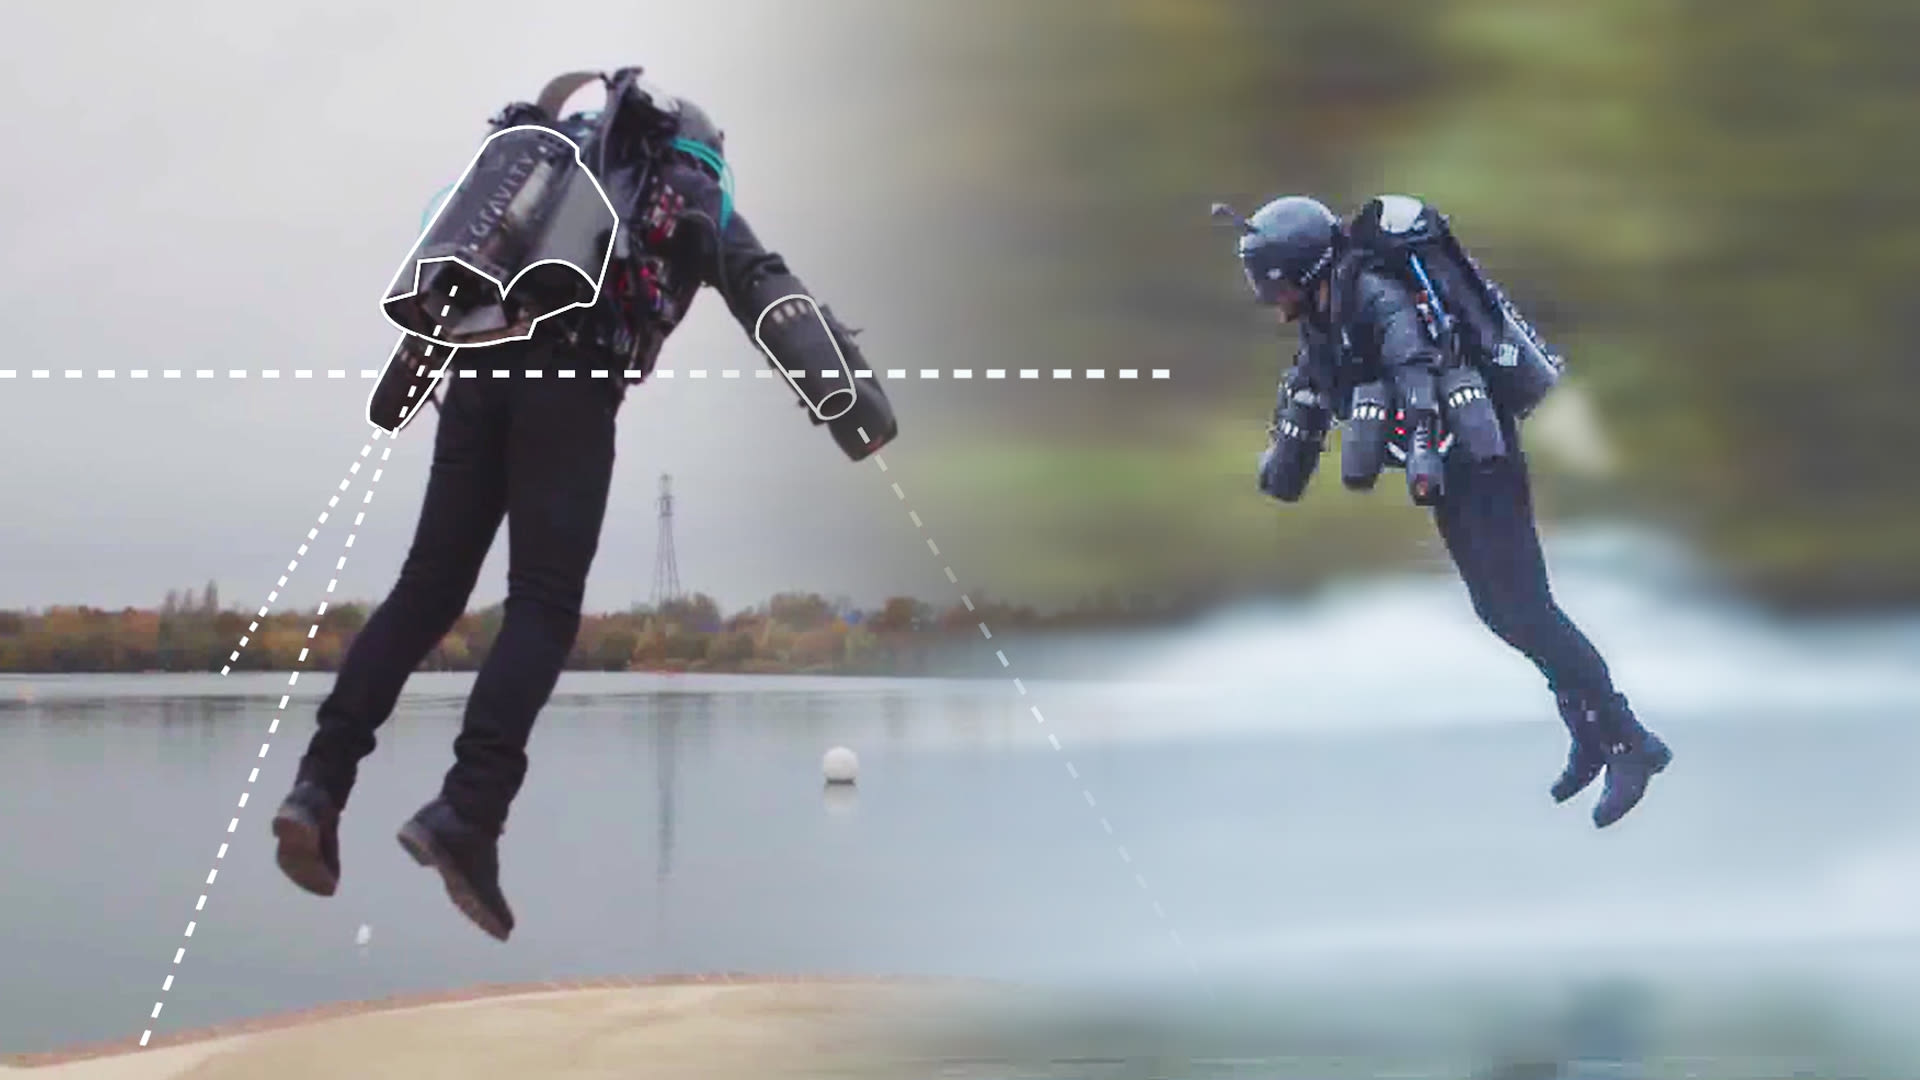 What it's like to ride Gravity Industries' jet suit